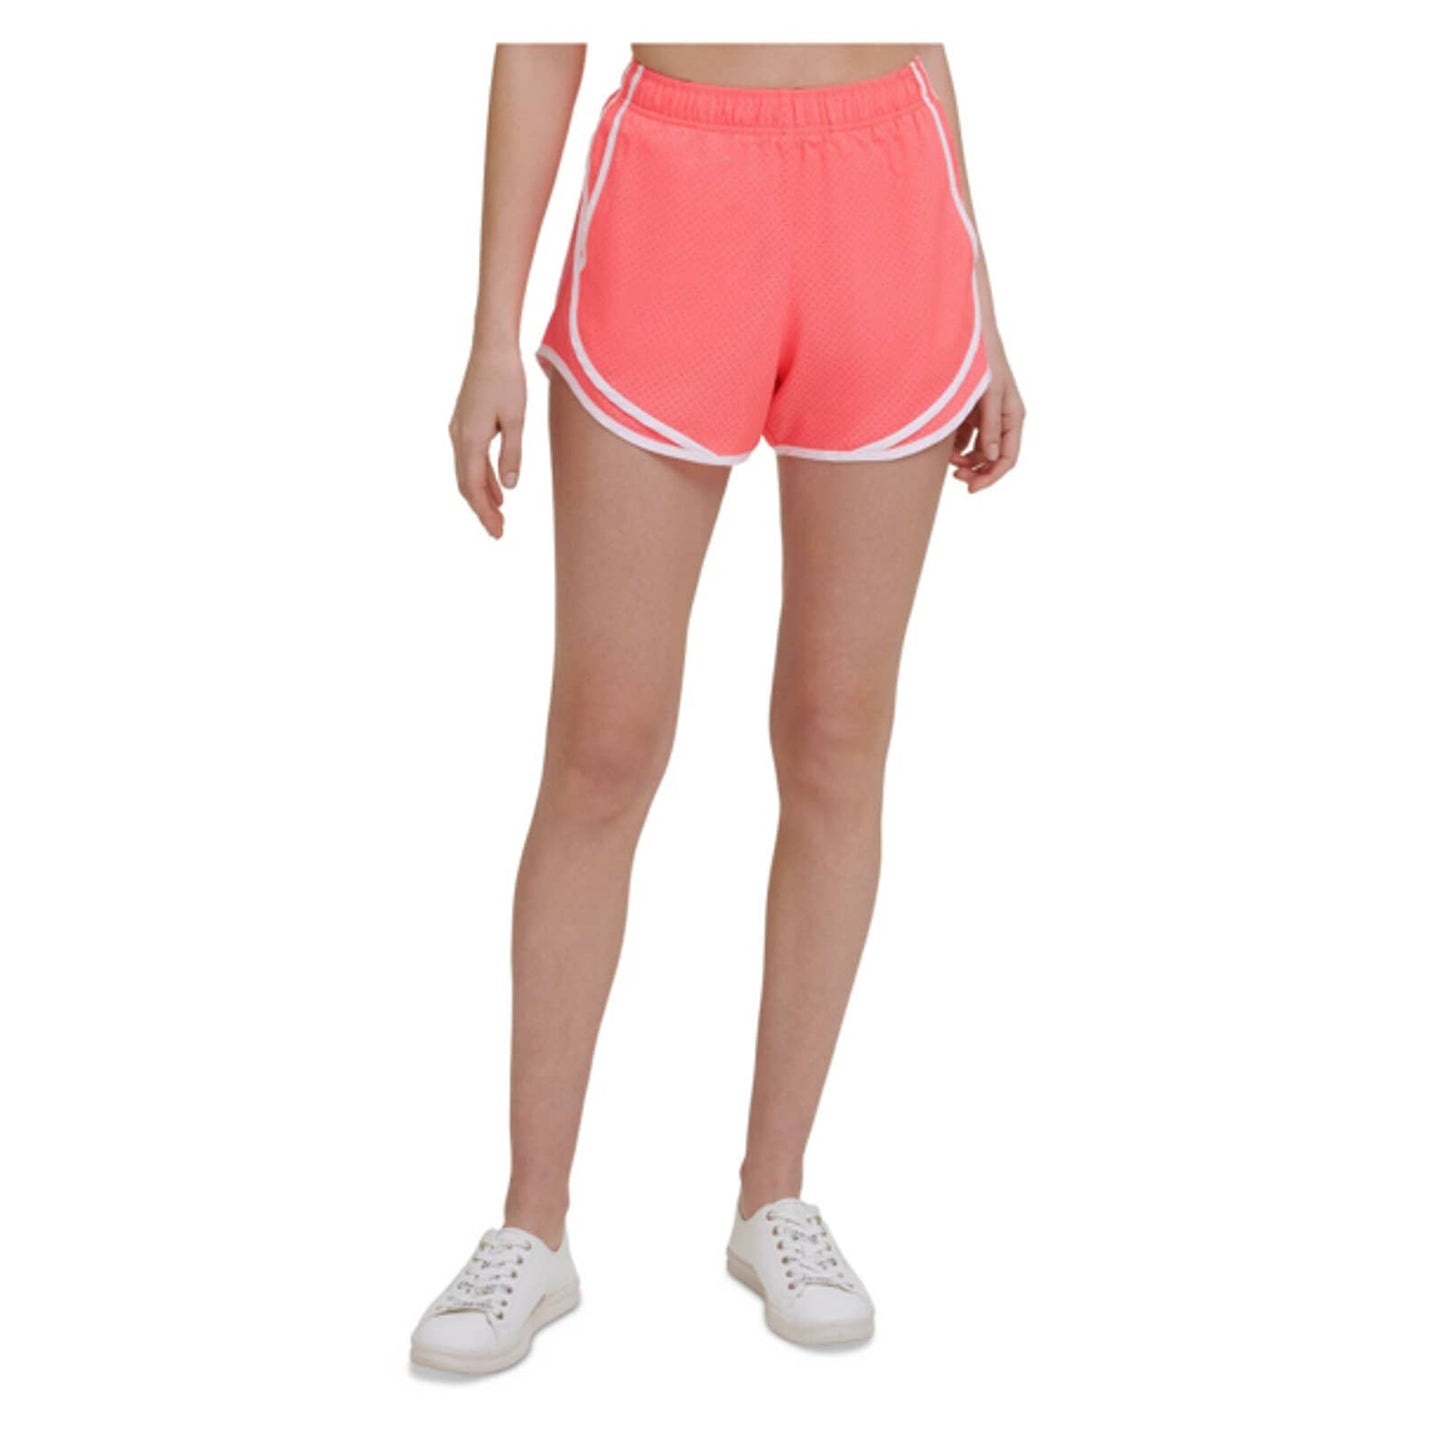 Calvin Klein Women's Perforated Shorts Radiance, NWT, $36